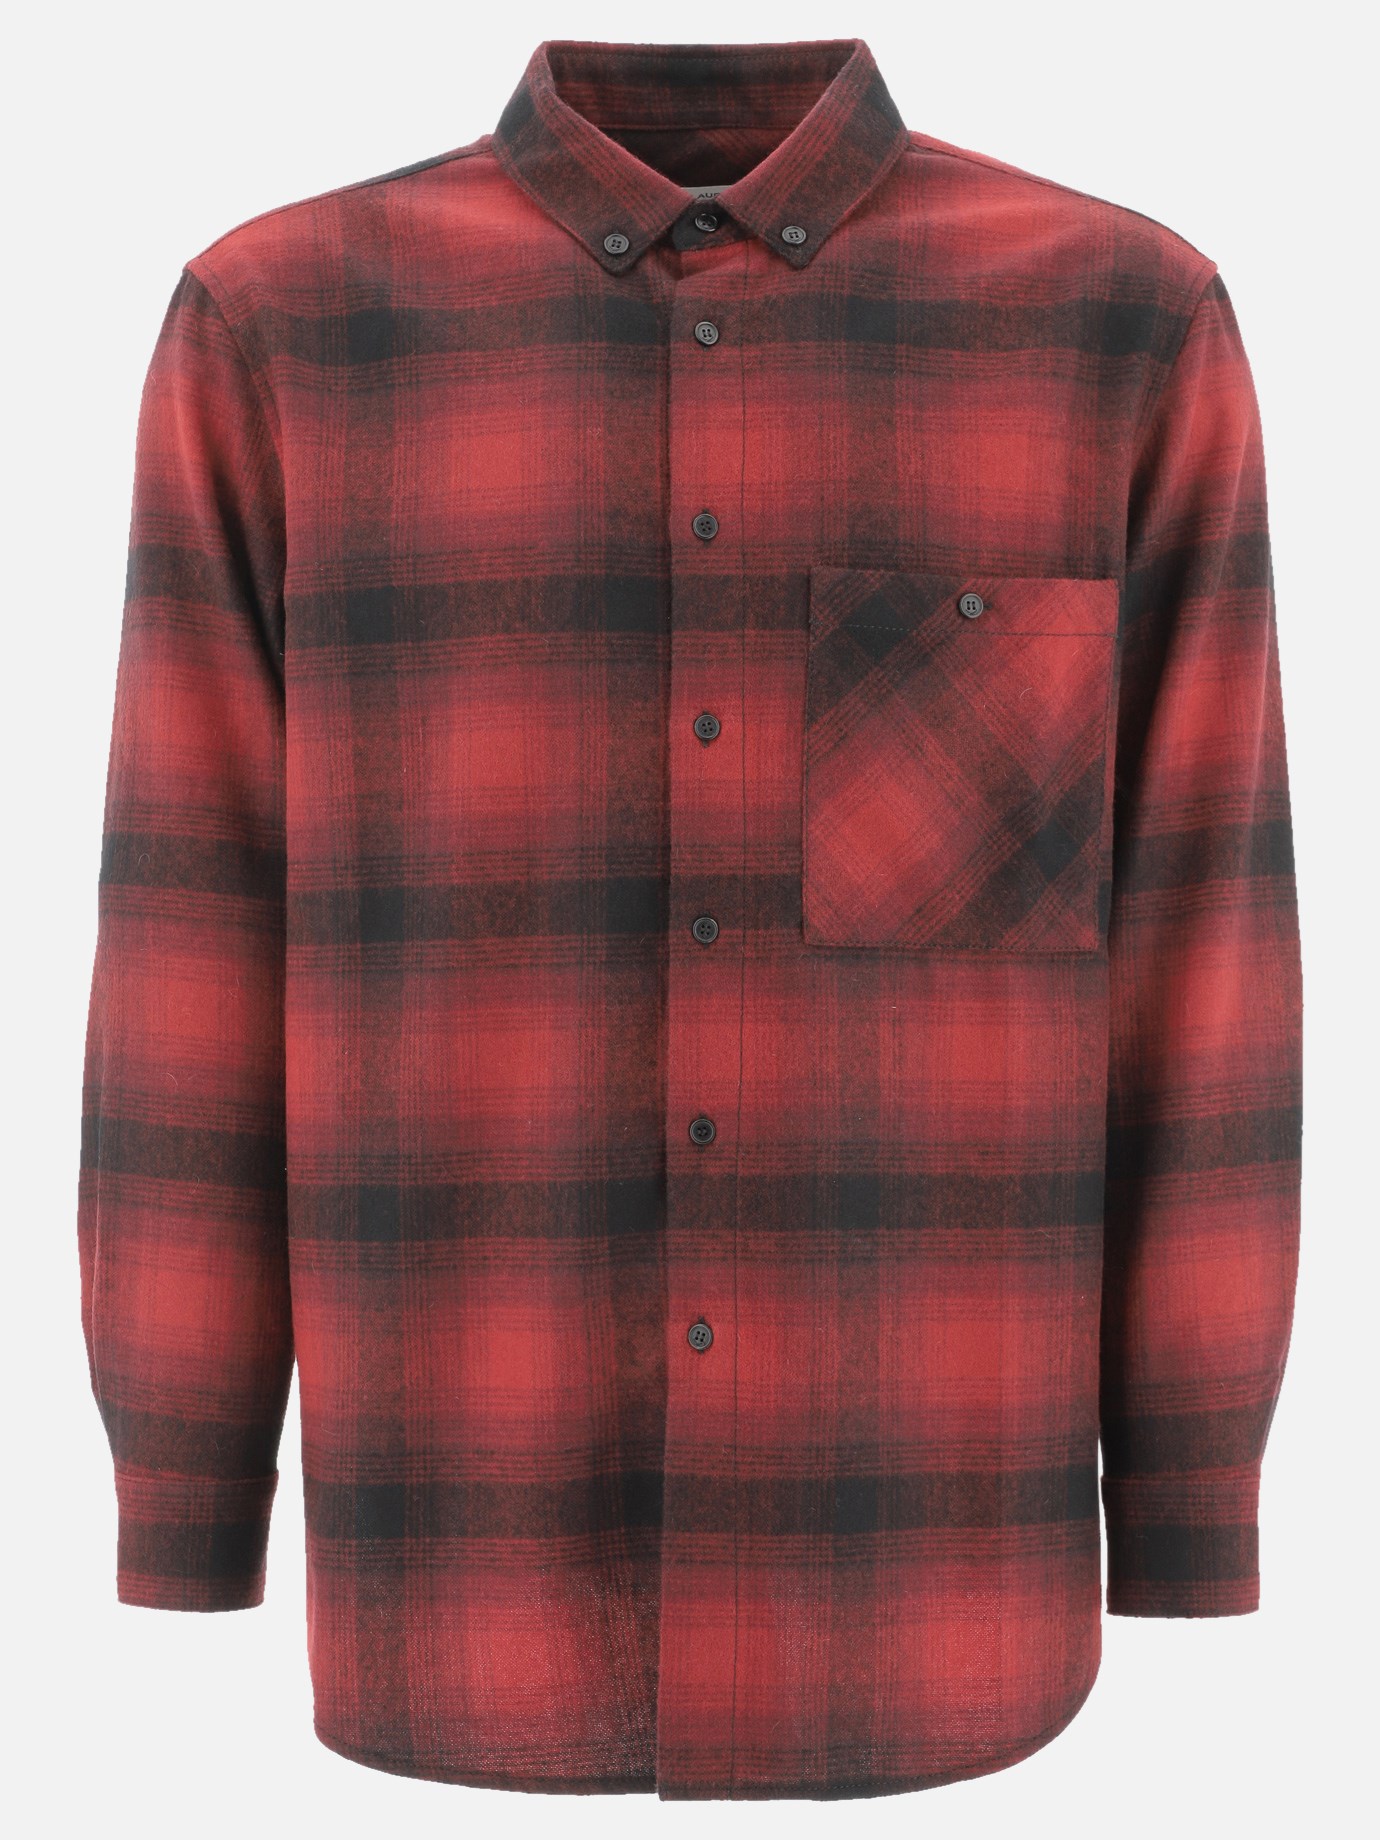 Checked flannel shirtby Saint Laurent - 2